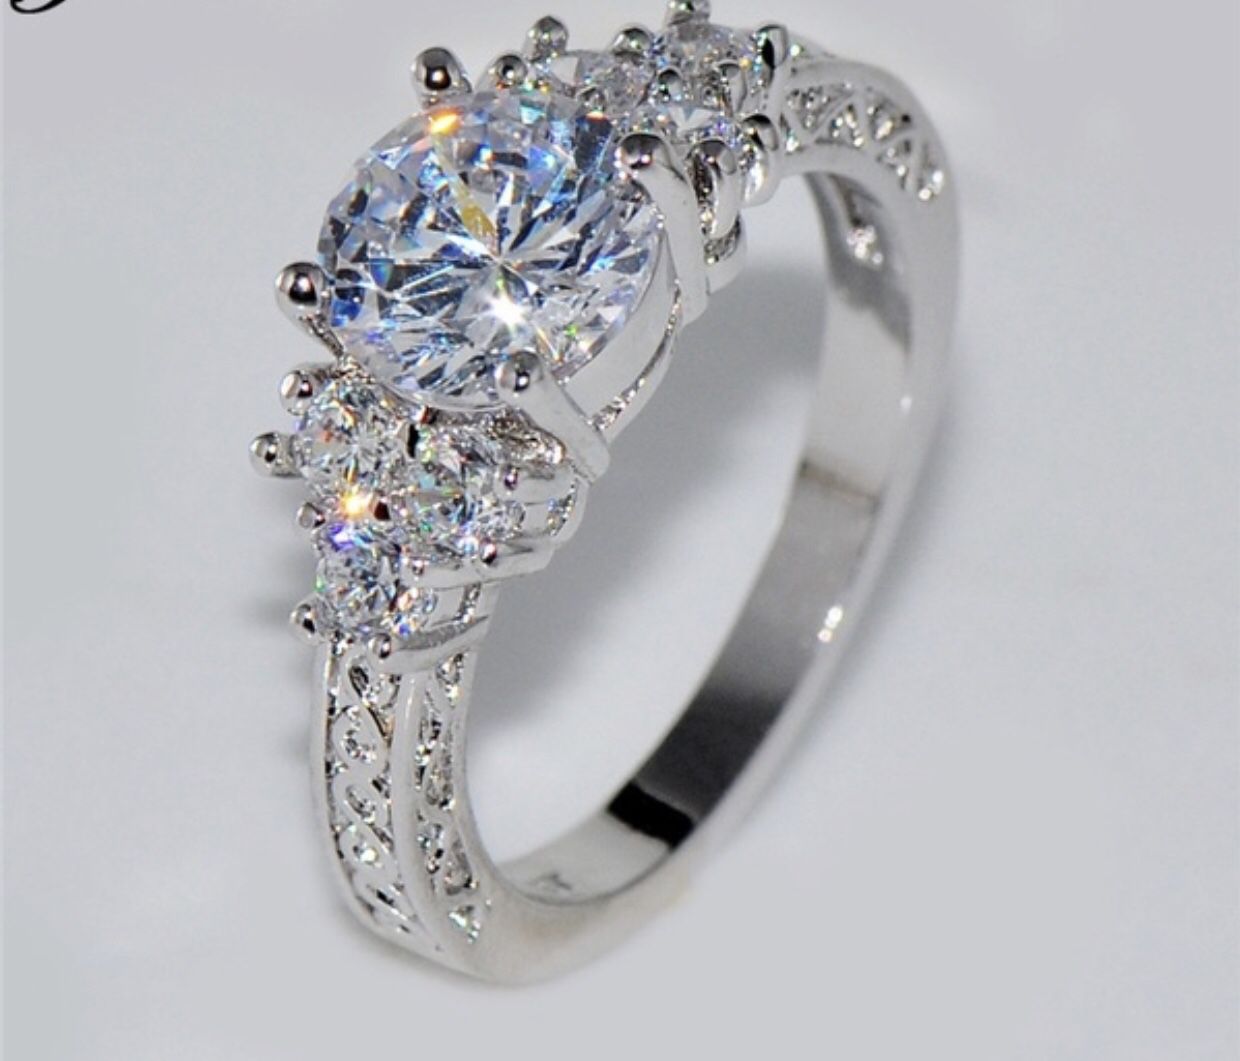 White Sapphire Wedding Ring 10KT White Gold Jewelry Sizes6/7/8/9 are available